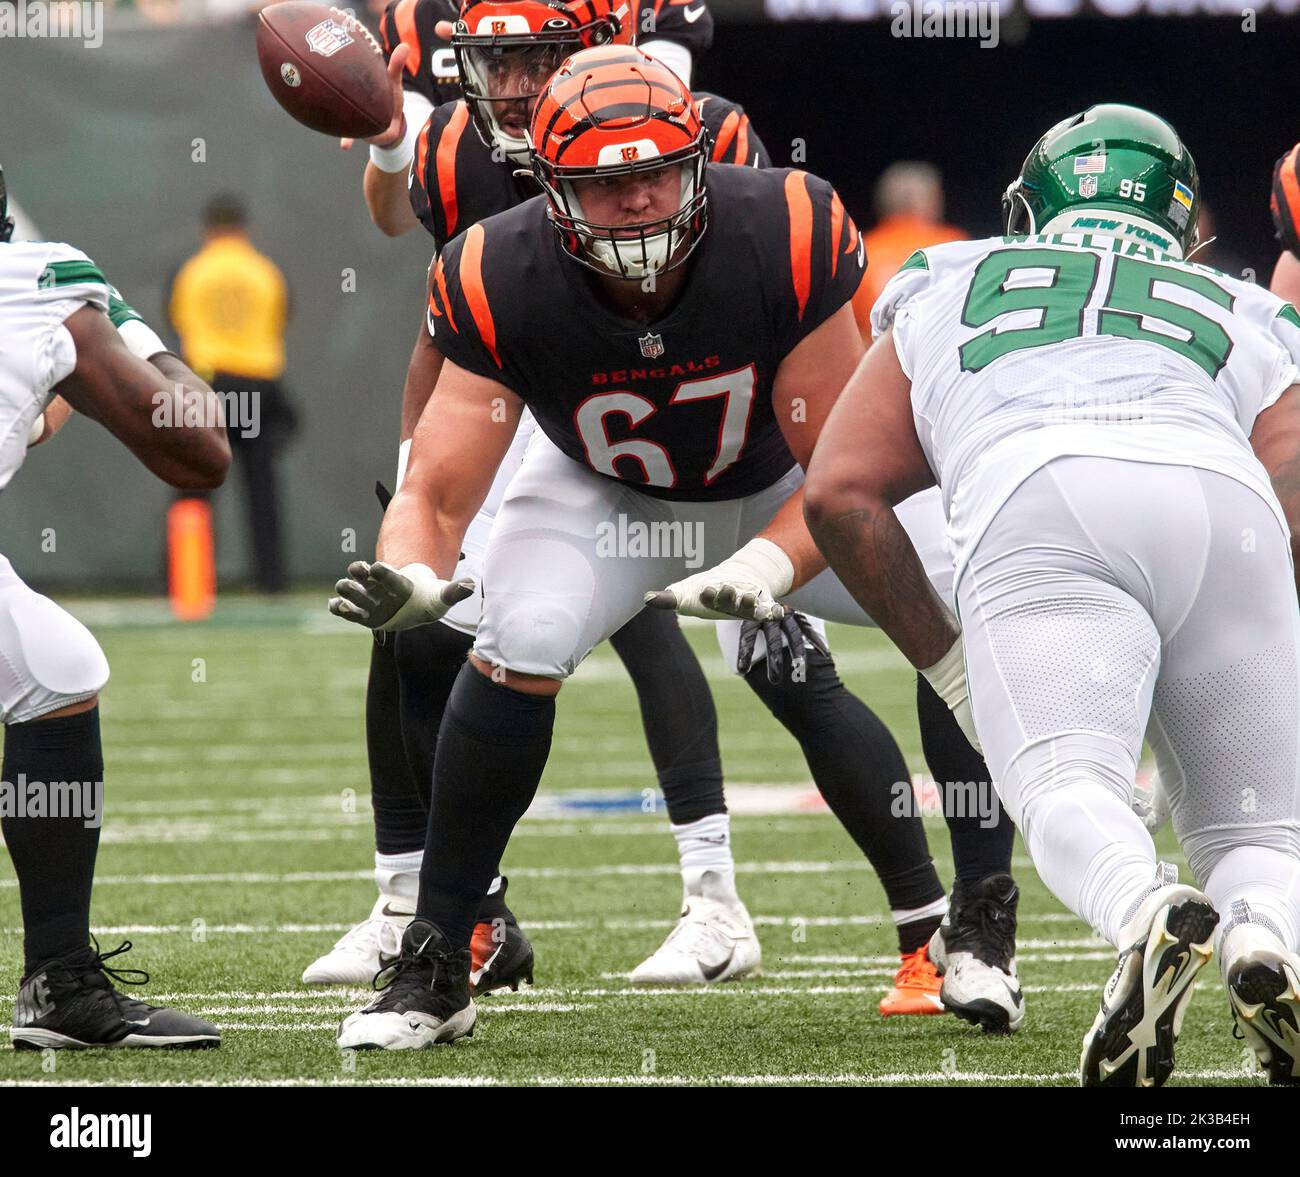 East Rutherford, New Jersey, USA. 26th Sep, 2022. Cincinnati Bengals offensive tackle Cordell Volson (67) sets to block New York Jets defensive tackle Quinnen Williams (95) during a NFL game at MetLife Stadium in East Rutherford, New Jersey on Sunday September 25, 2022. Cincinnati Bengals defeated the New York Jets 27-12. Duncan Williams/CSM/Alamy Live News Stock Photo